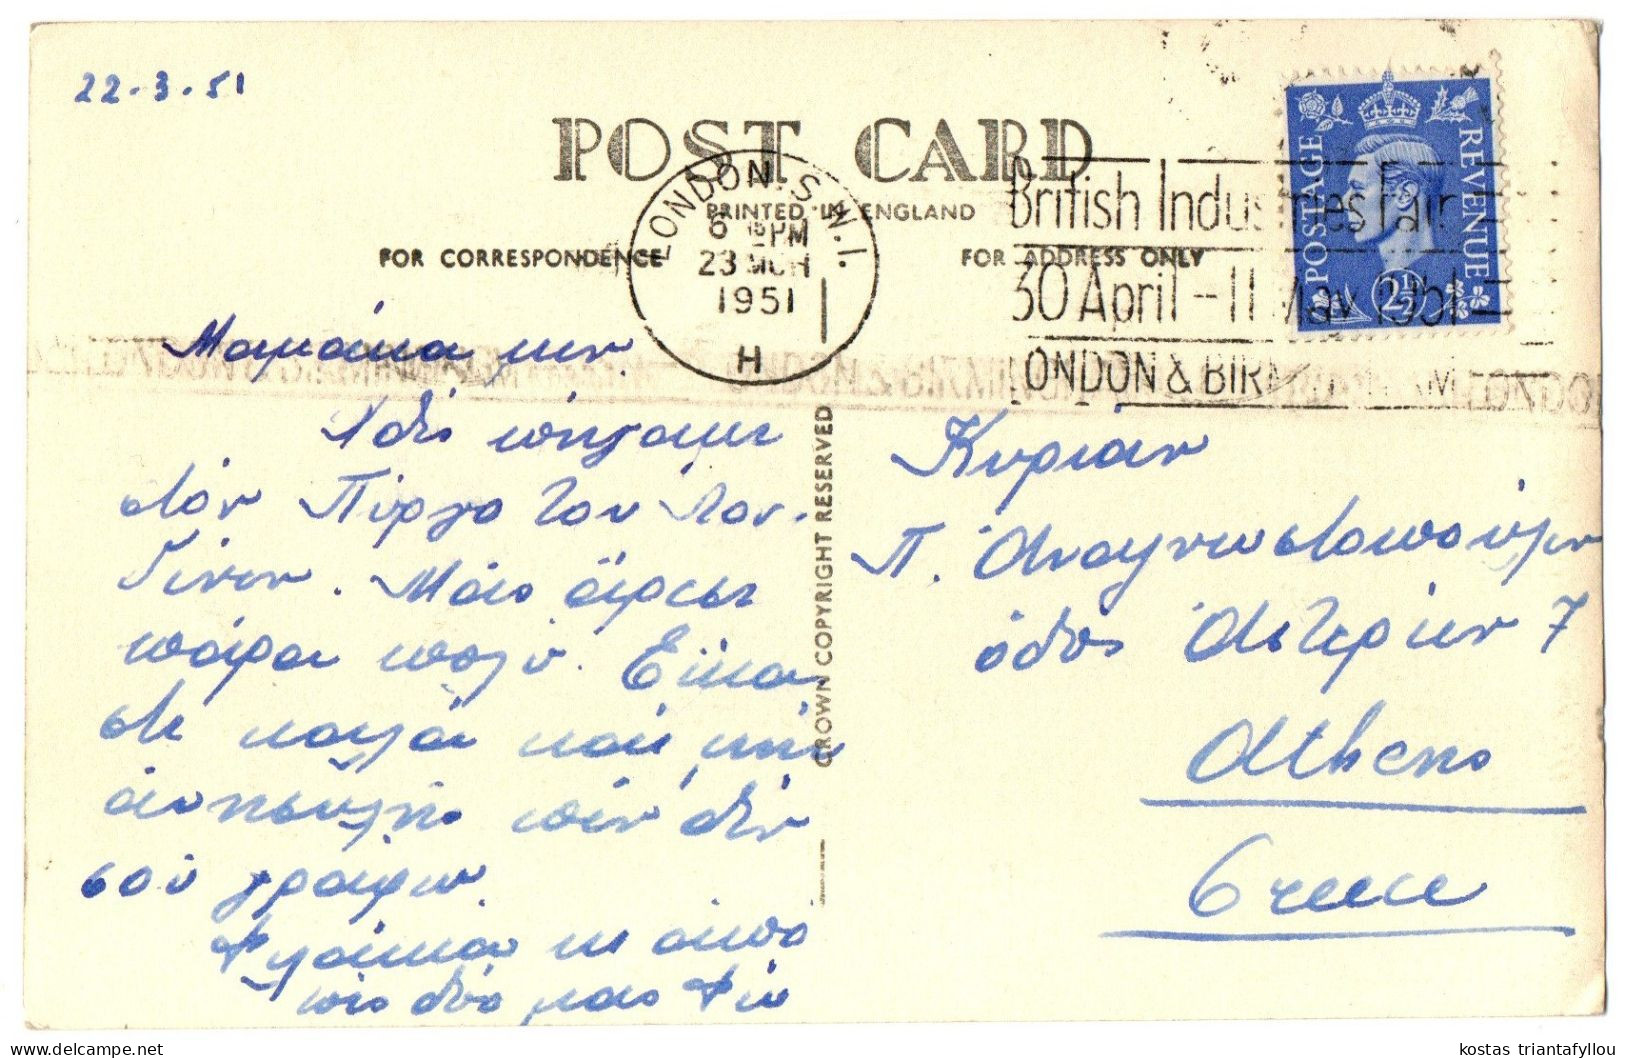 1.10.17 ENGLAND, LONDON, TOWER OF LONDON, MINISTRY OF WORKS, 1951, POSTCARD - Tower Of London